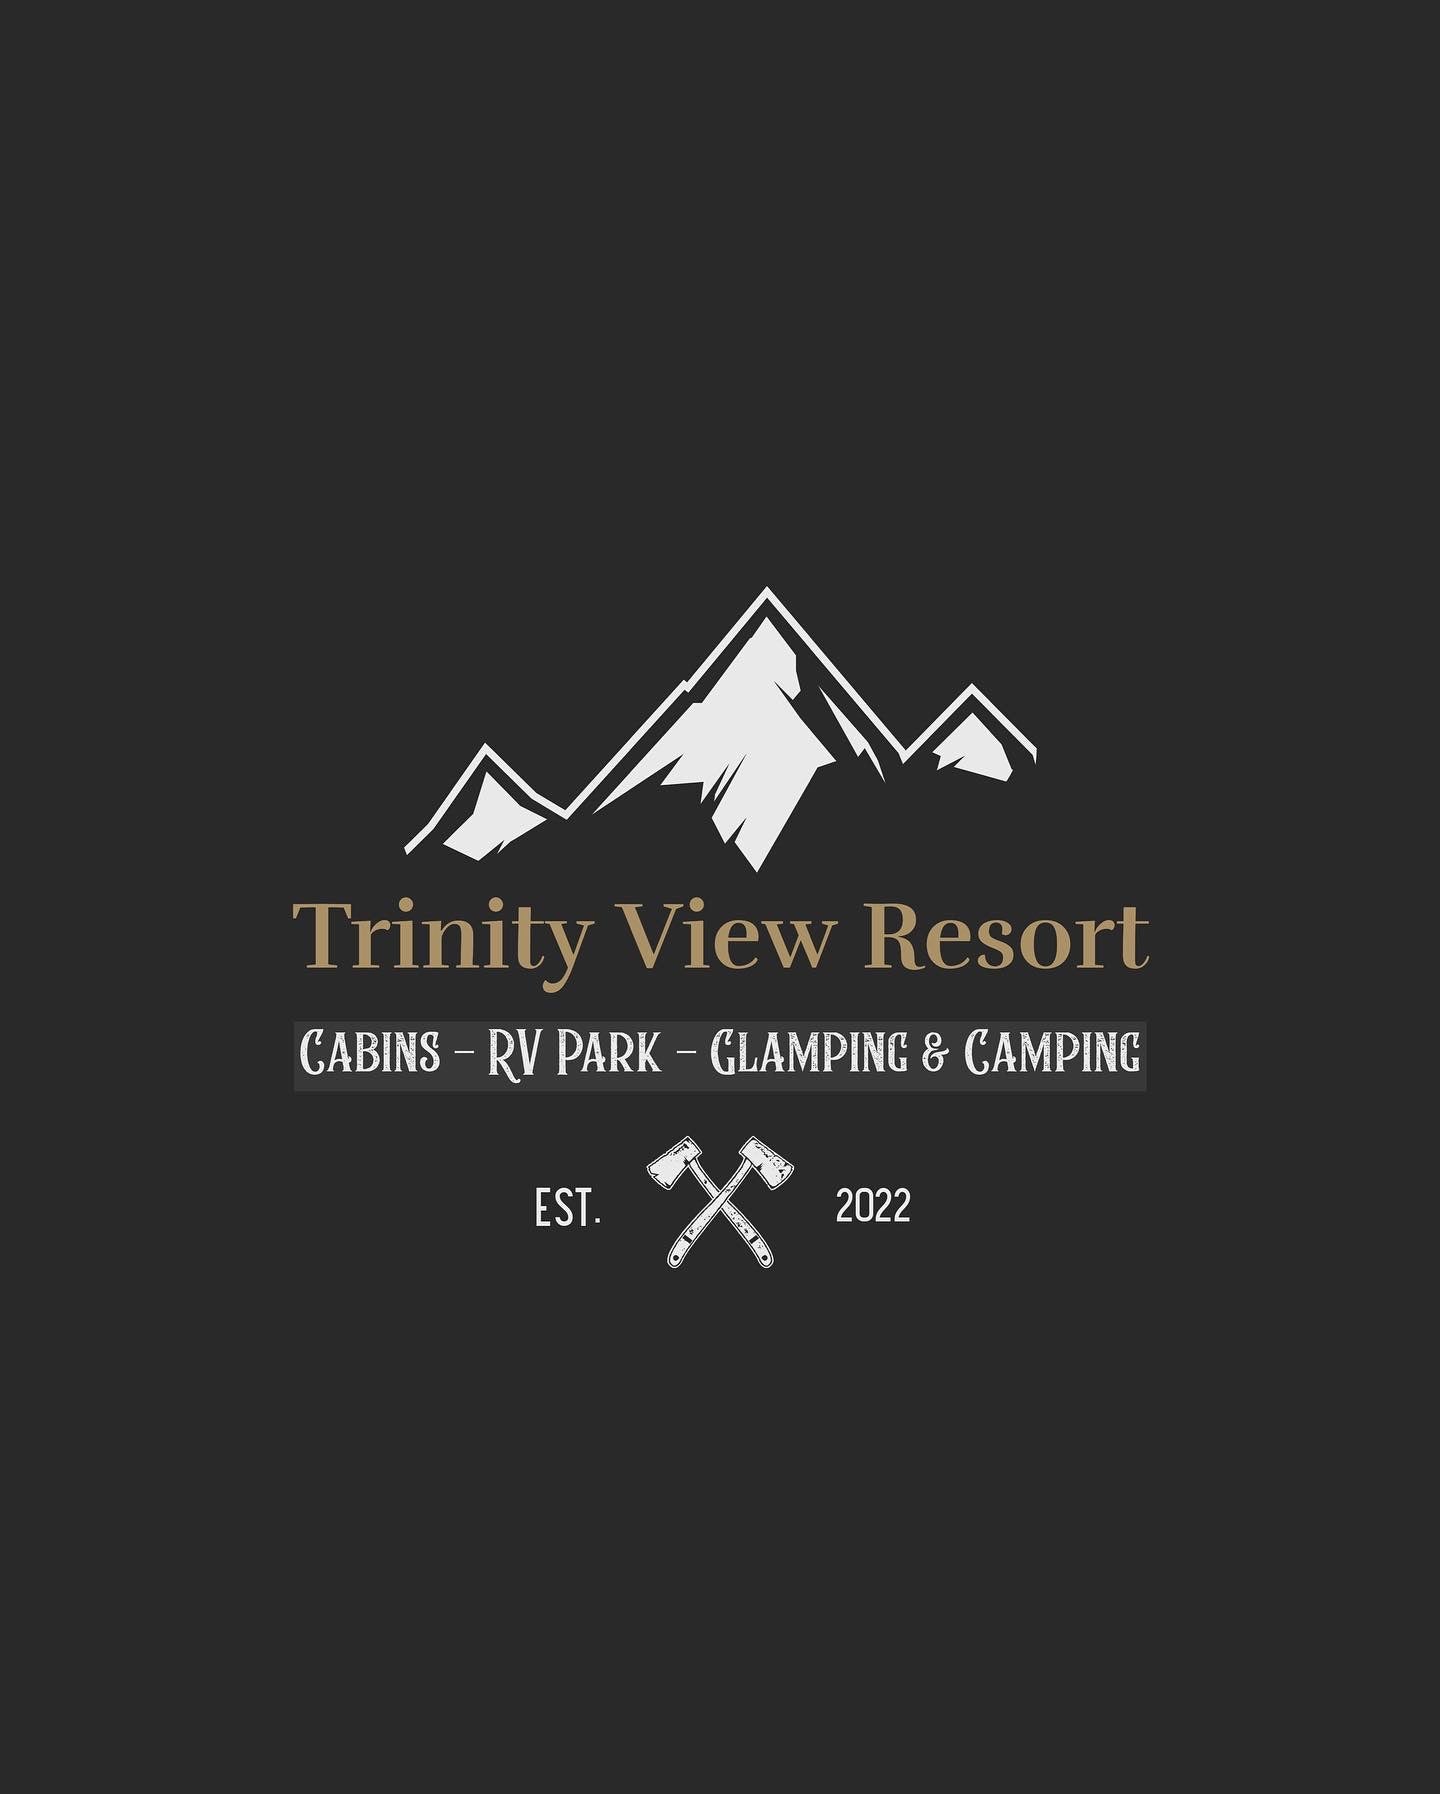 Camper submitted image from Trinity View Resort - 1